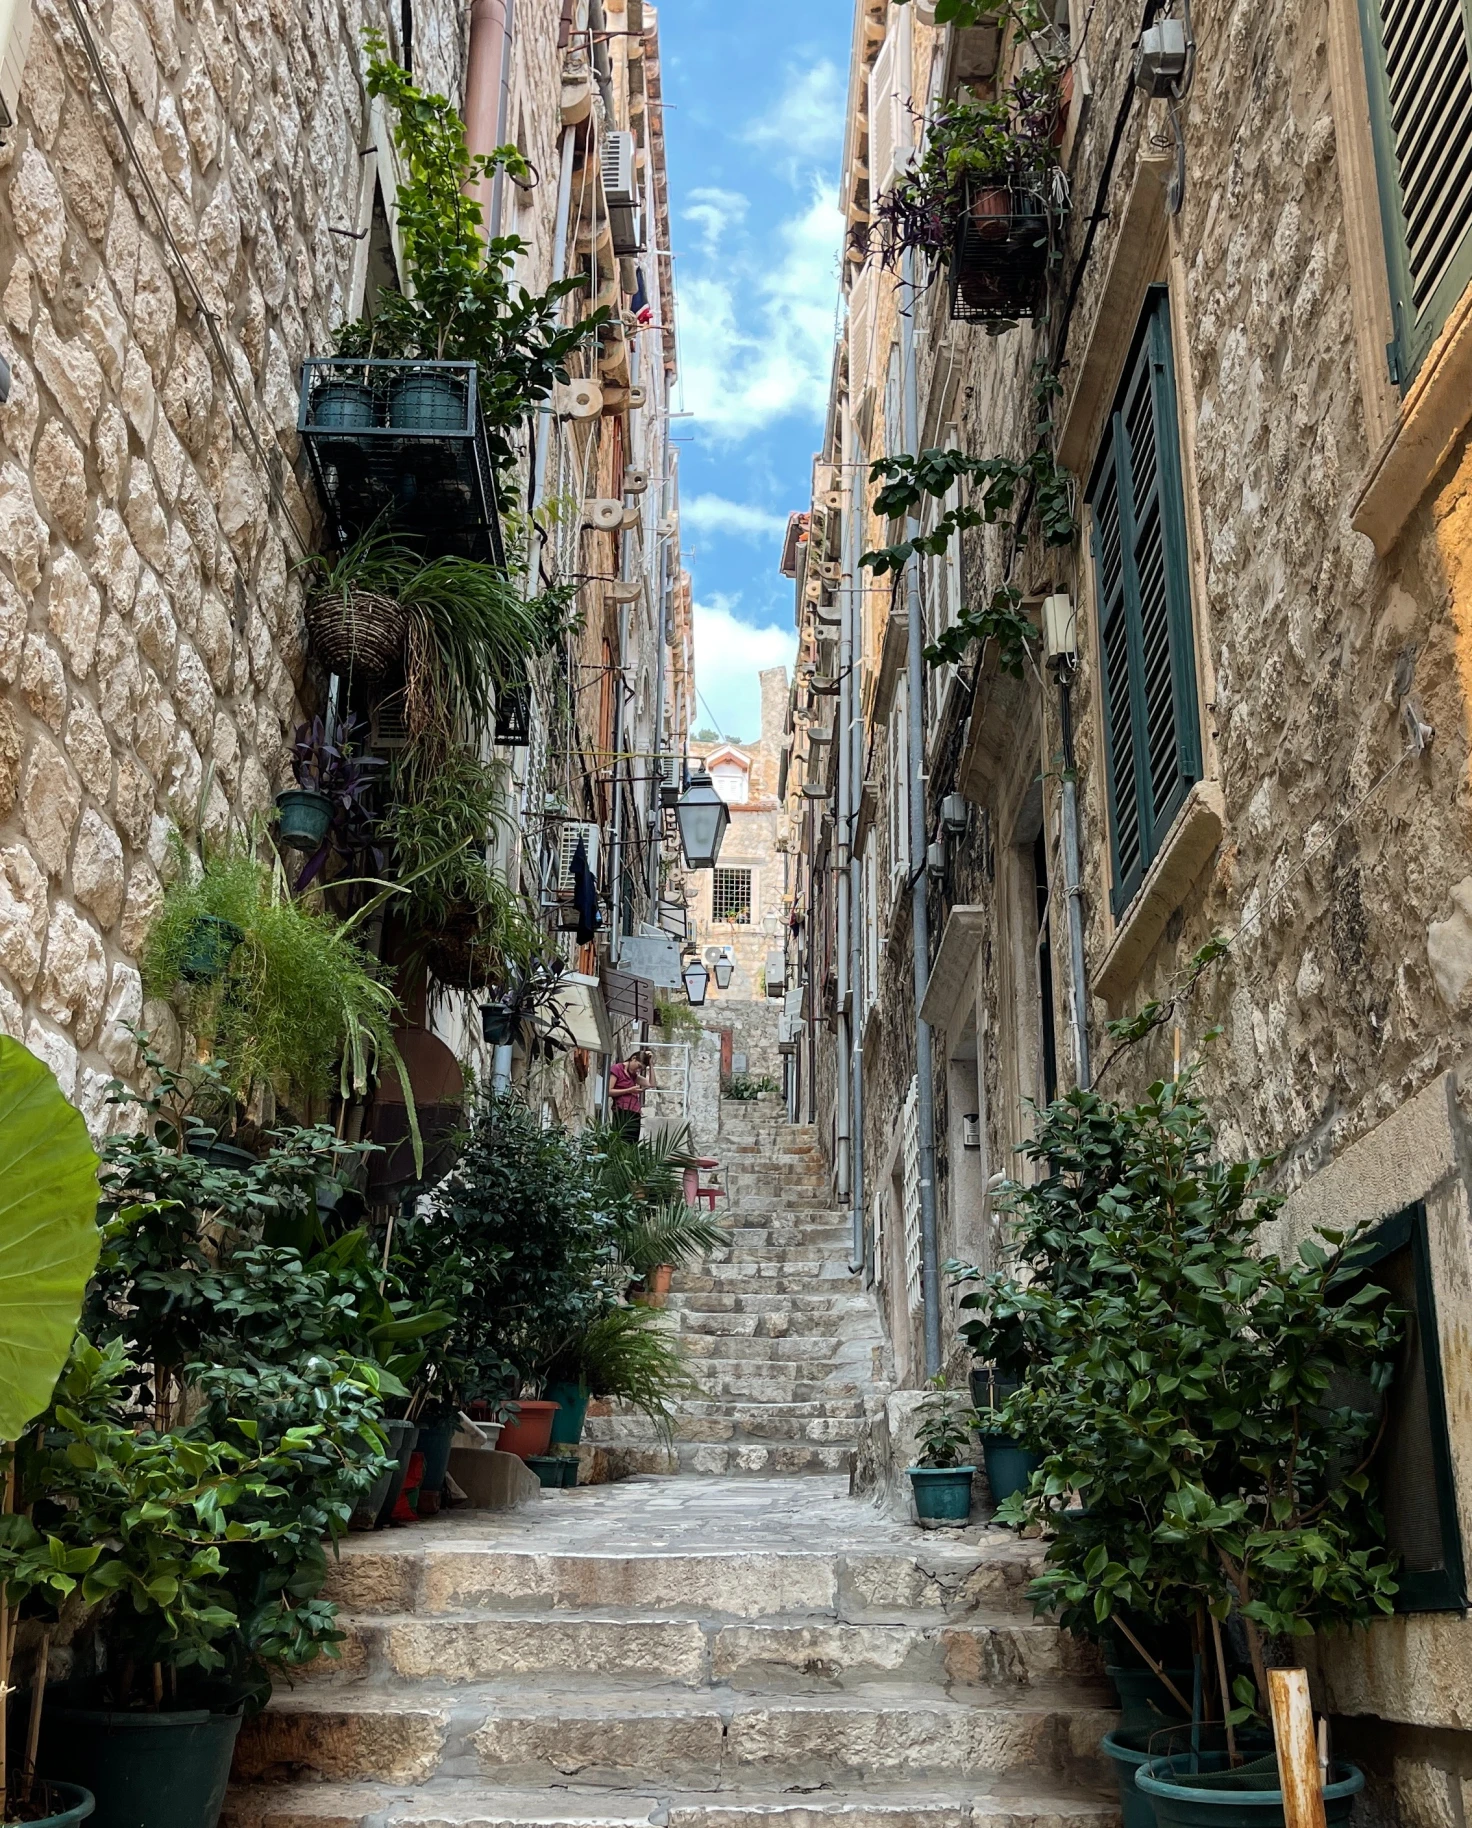 Narrow alleyway and stairway in Dubrovnik with plant pots and street lamps.